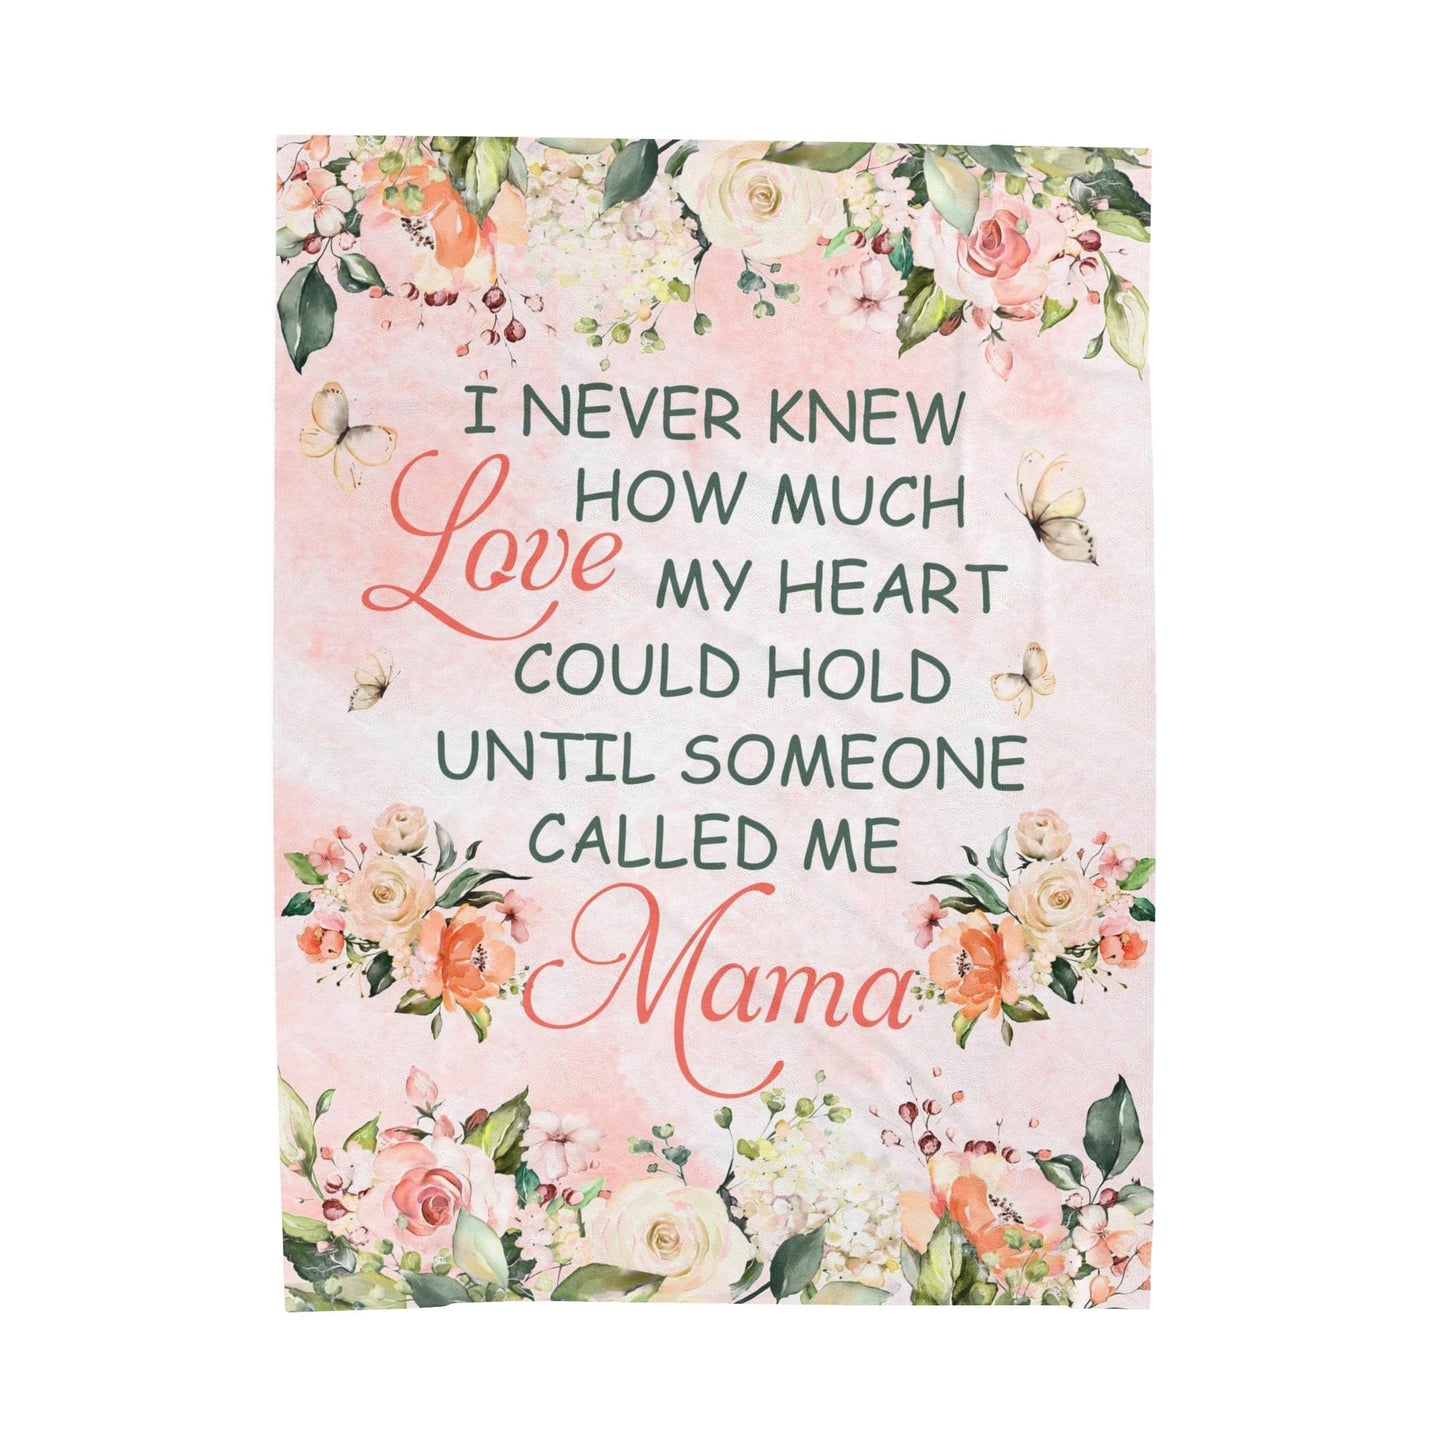 Mama Velveteen Plush Blanket - Soft and Oversized to Keep Your Mom Comfy!